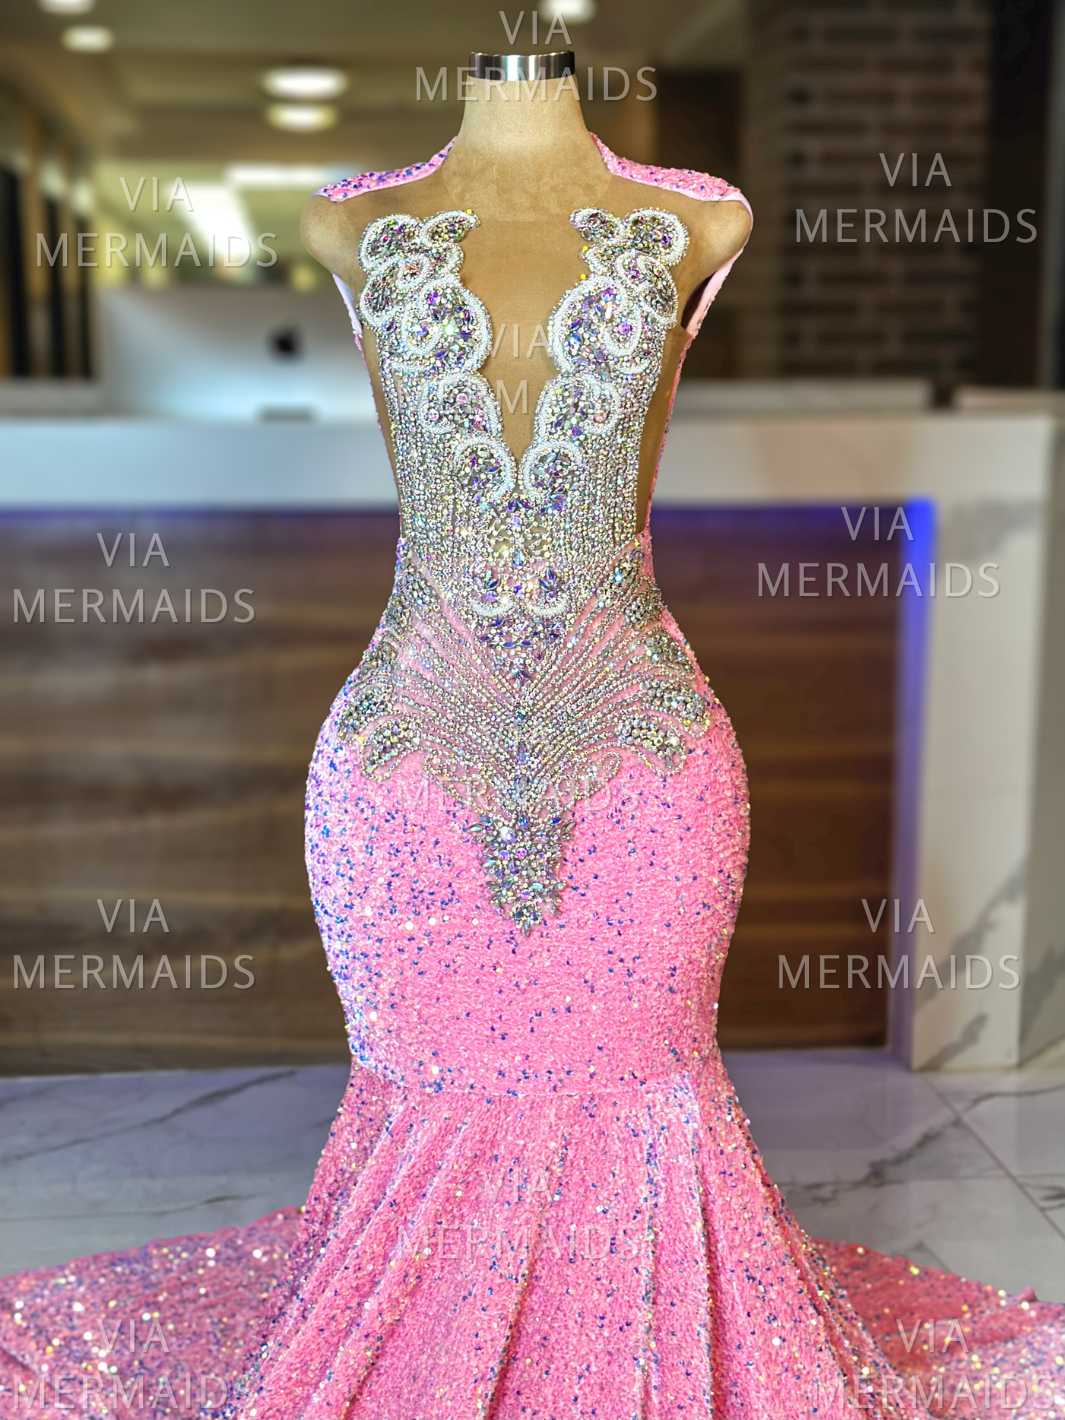 MICAH - Iridescent Pink Sequins Prom Dress with Iridscent Rhinestones PRE-ORDER-  SHIP ESTIMATED: 05/07